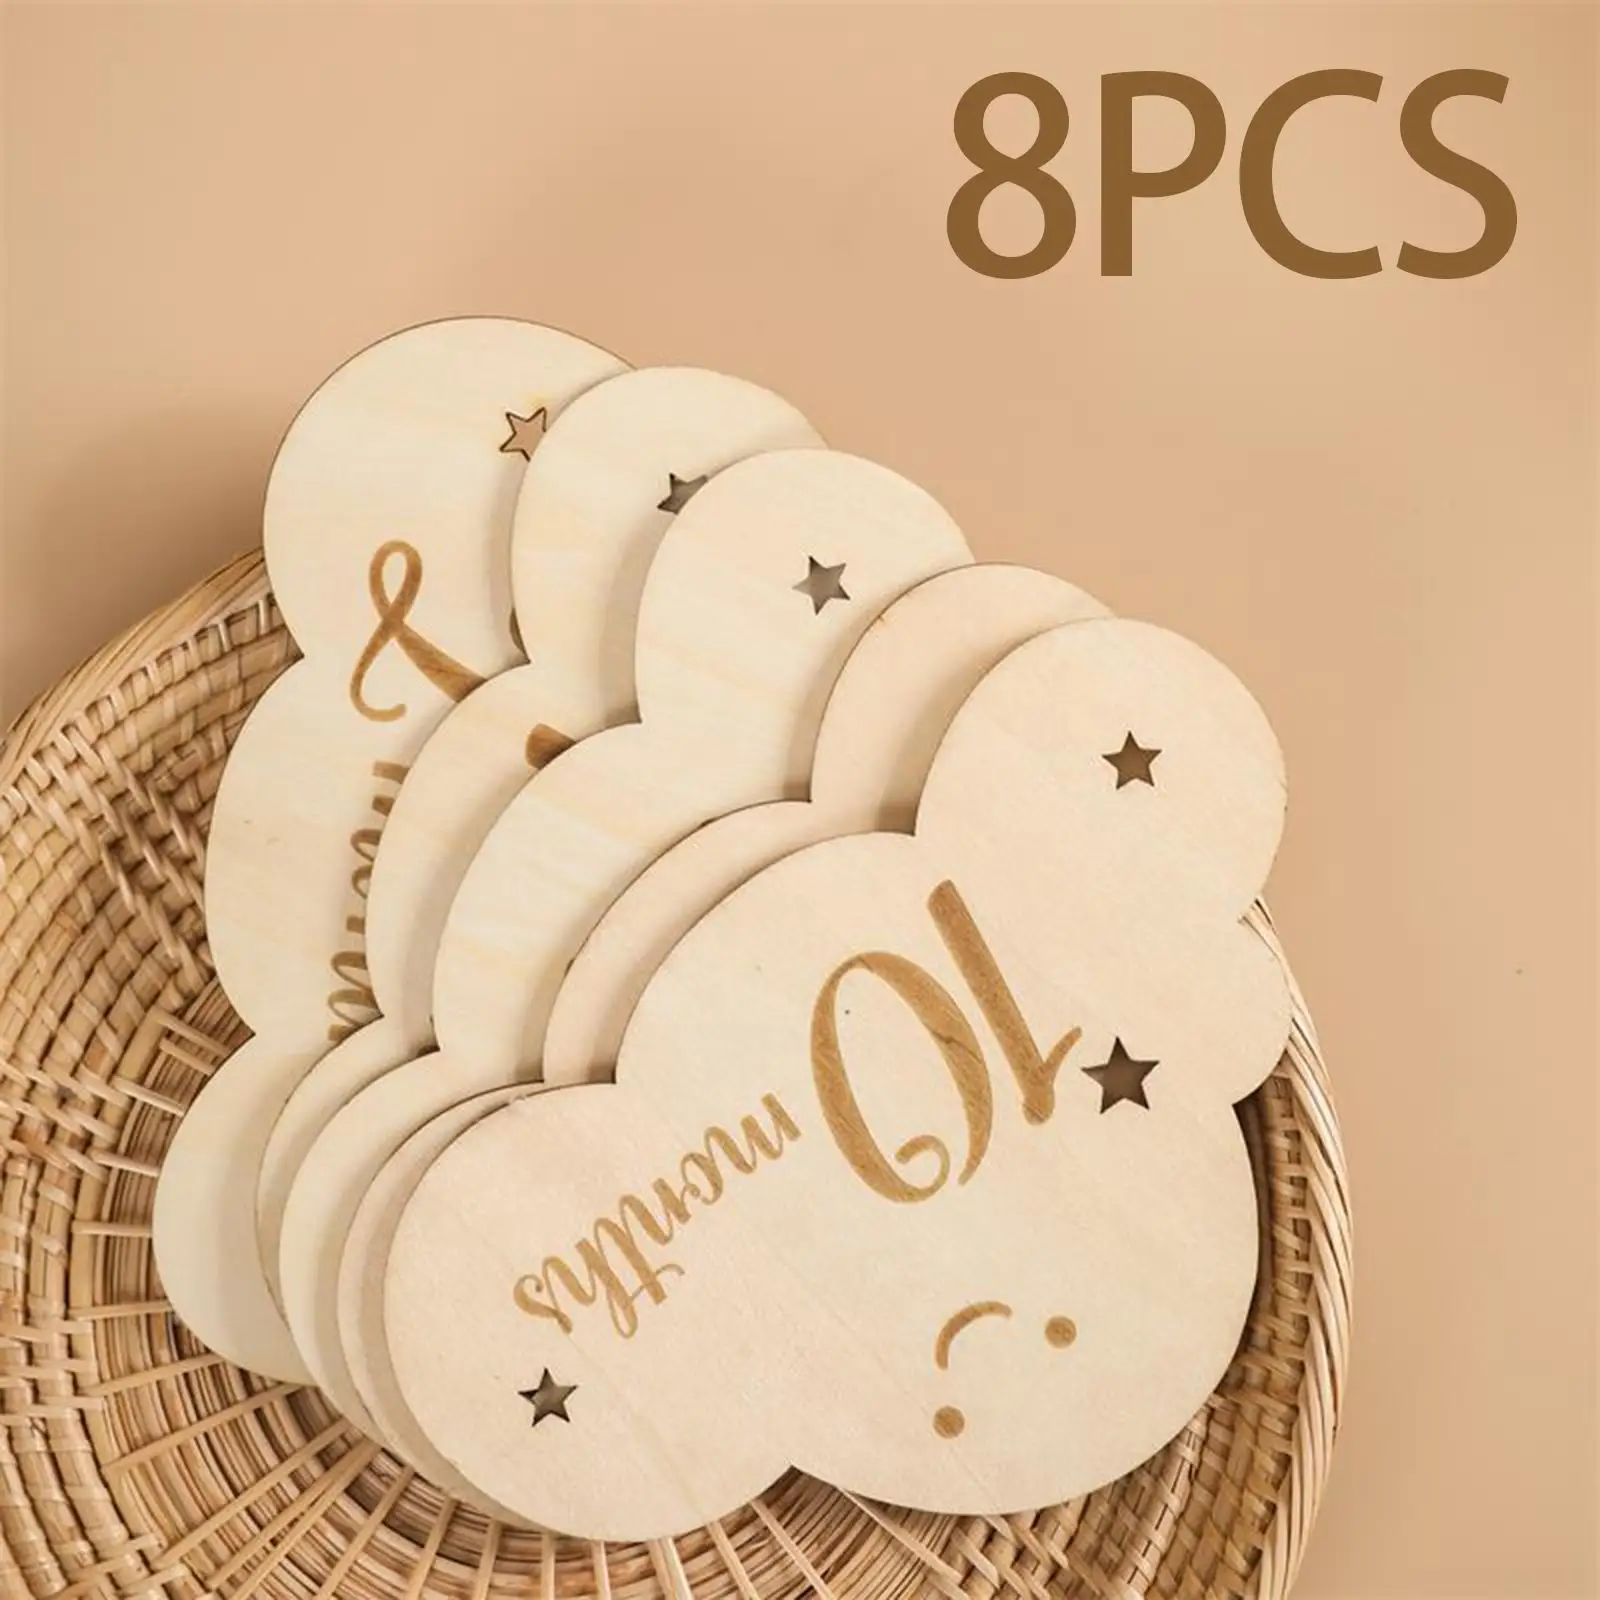 8Pcs Baby Milestone Cards Smooth Surface Cute Clouds Shape Engraved Record Growth Newborn Gifts Birth Journey Milestone Markers